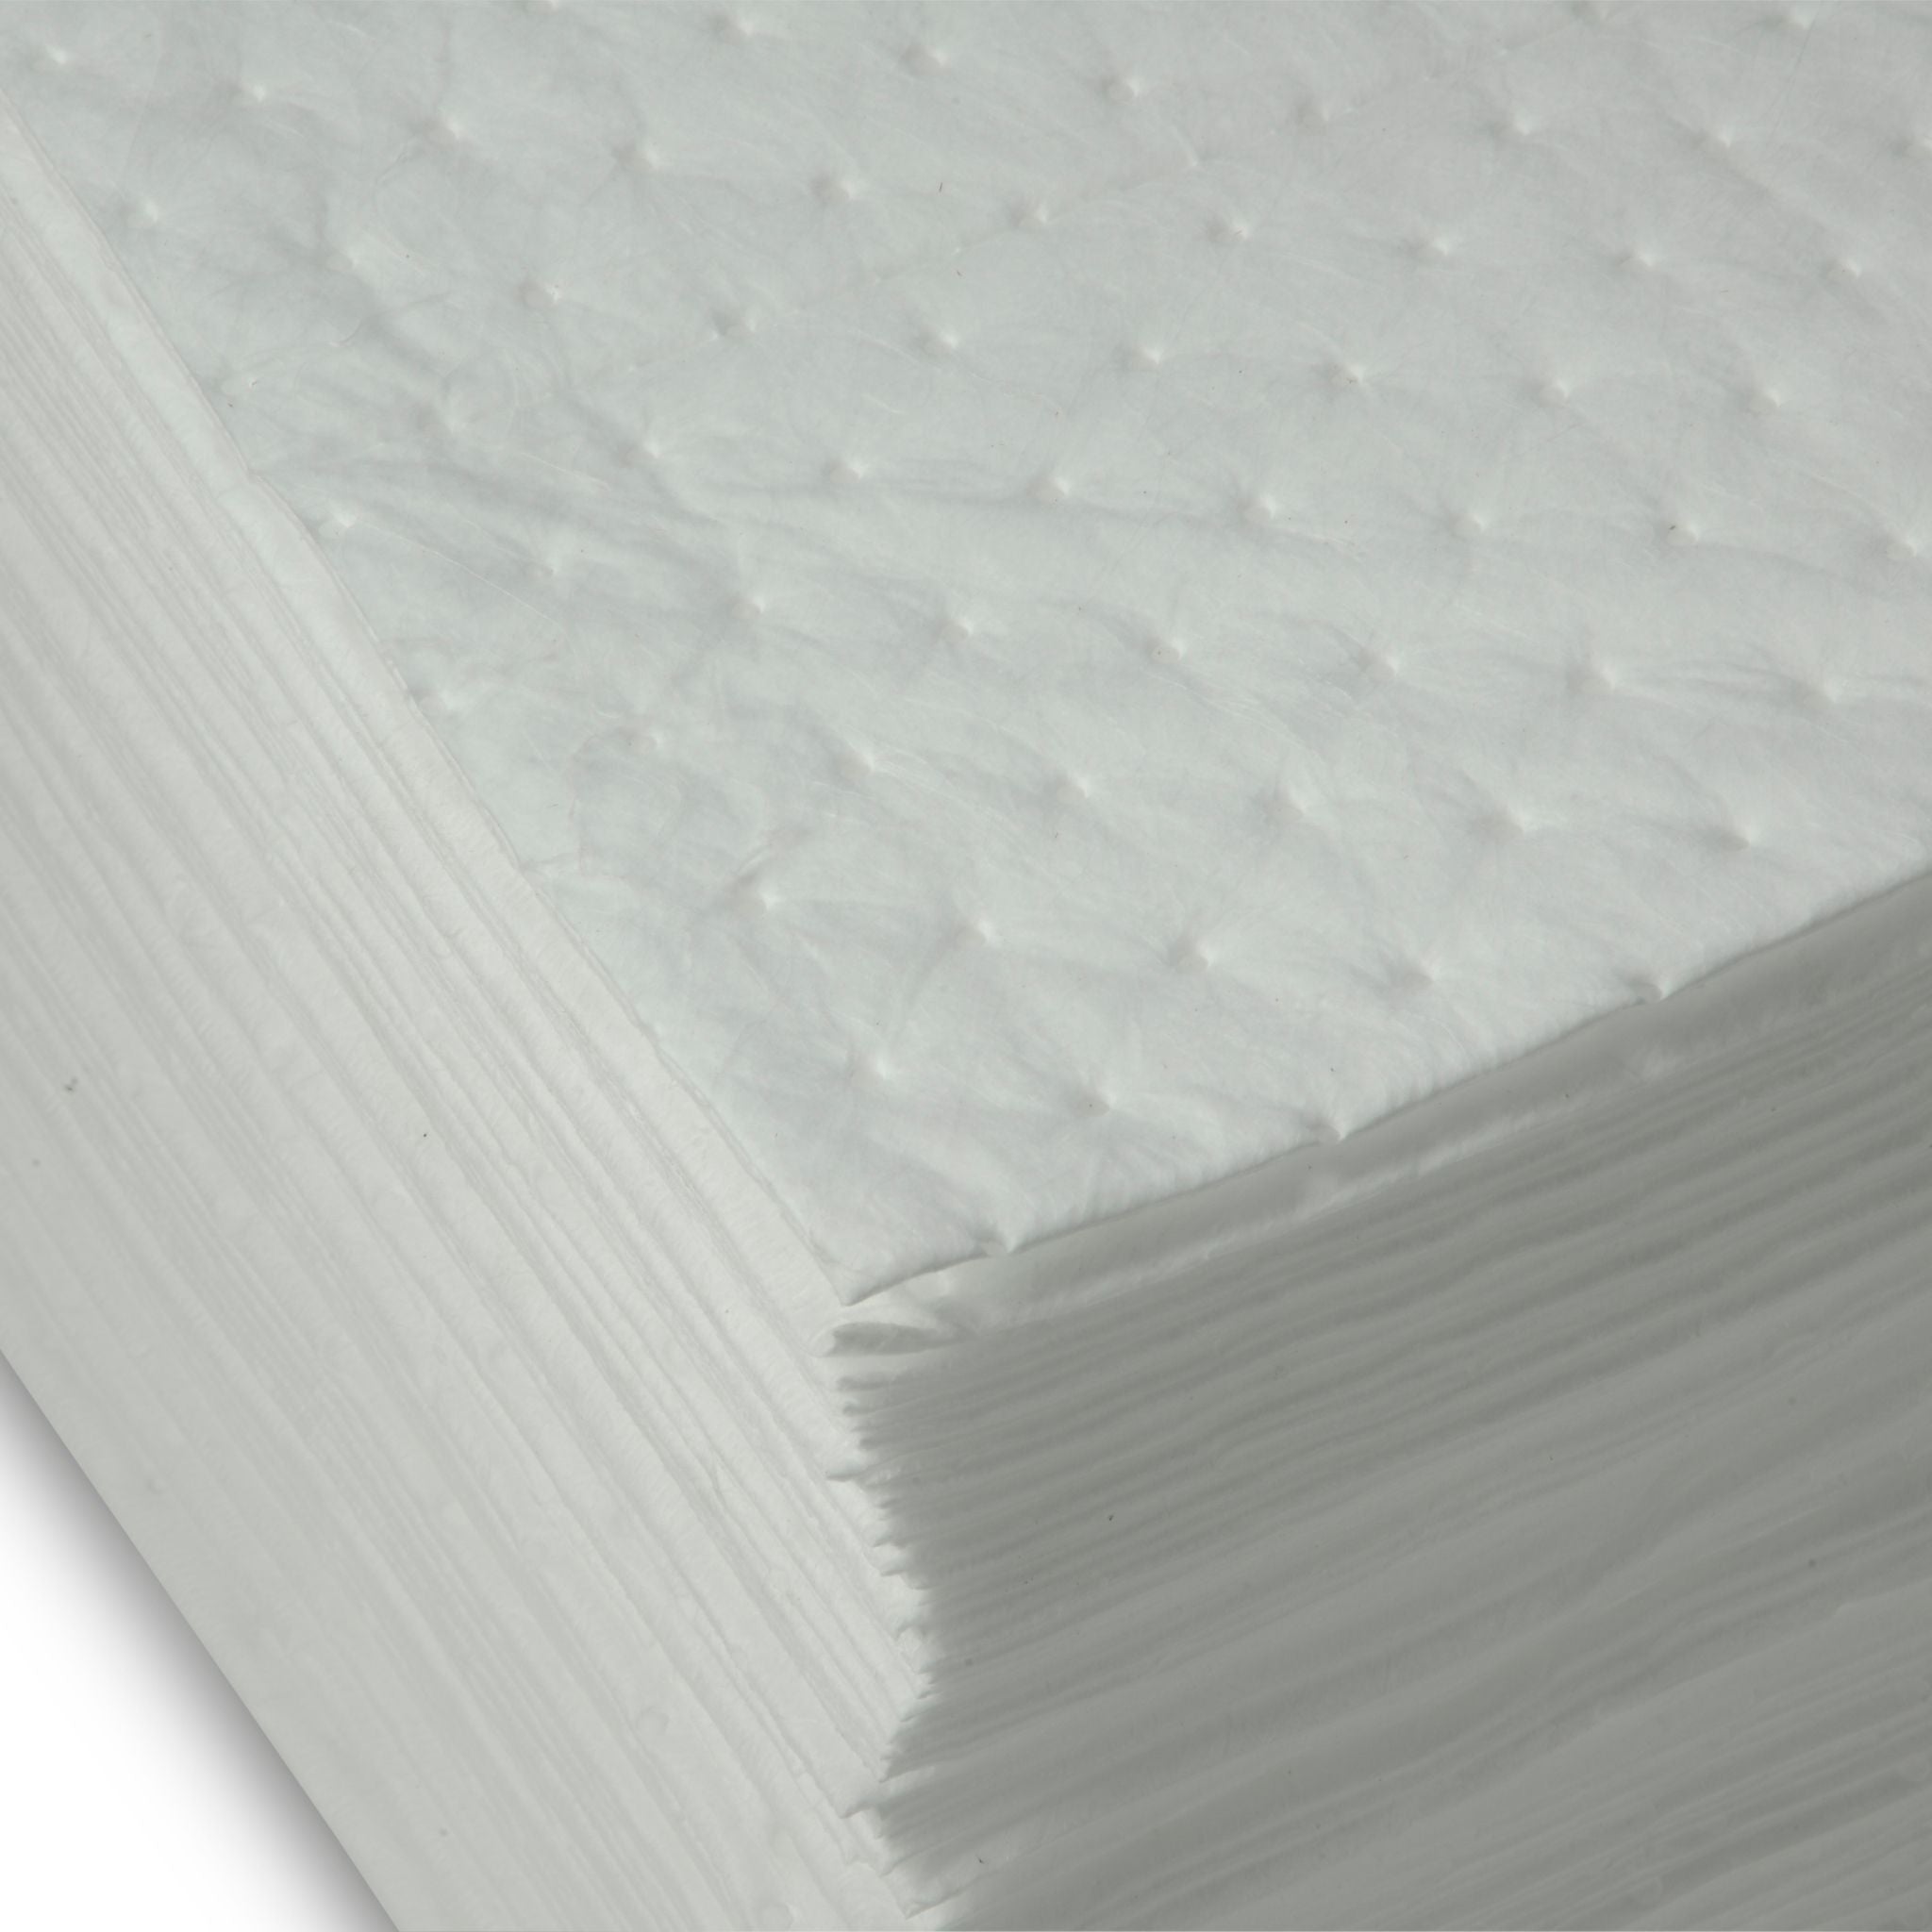 Oil-Only Absorbent Pads